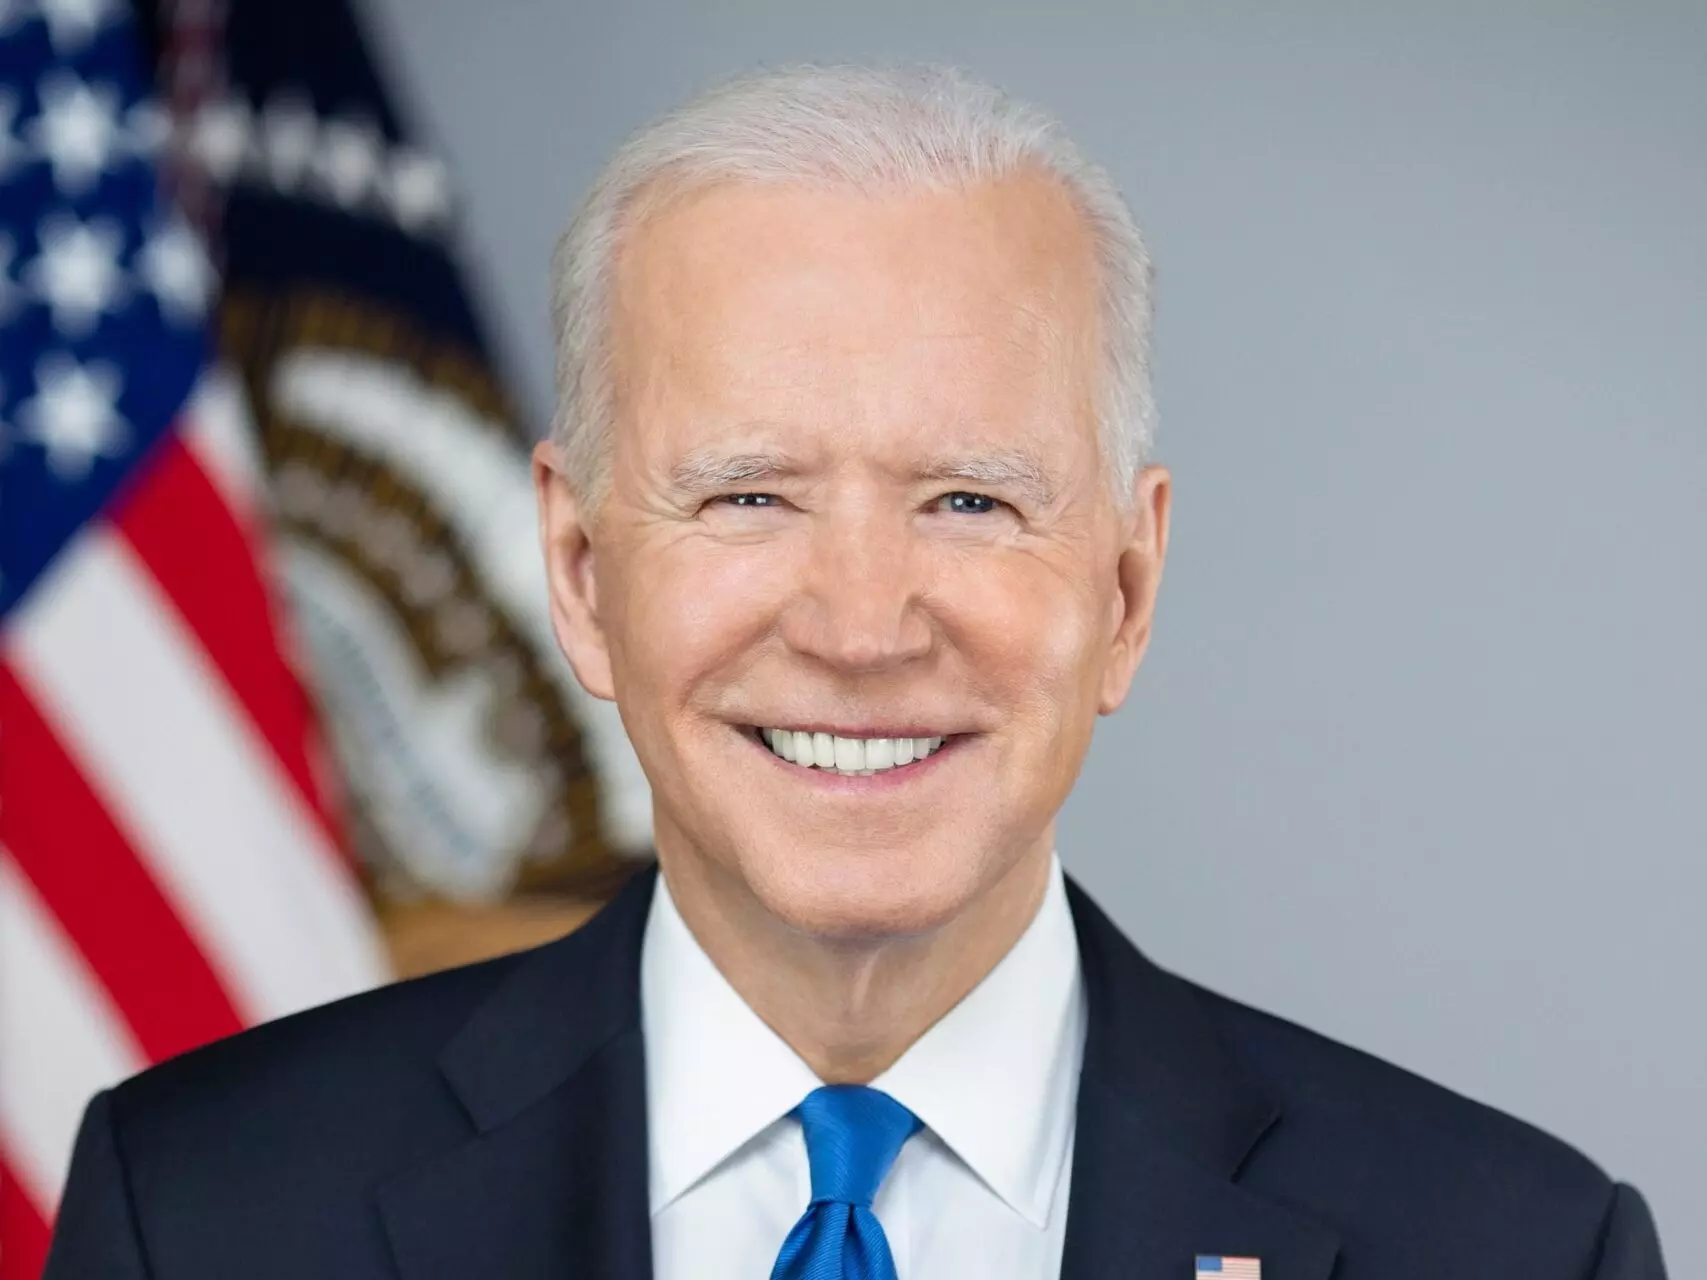 Biden reaffirms support for abortion on anniversary of Roe v. Wade